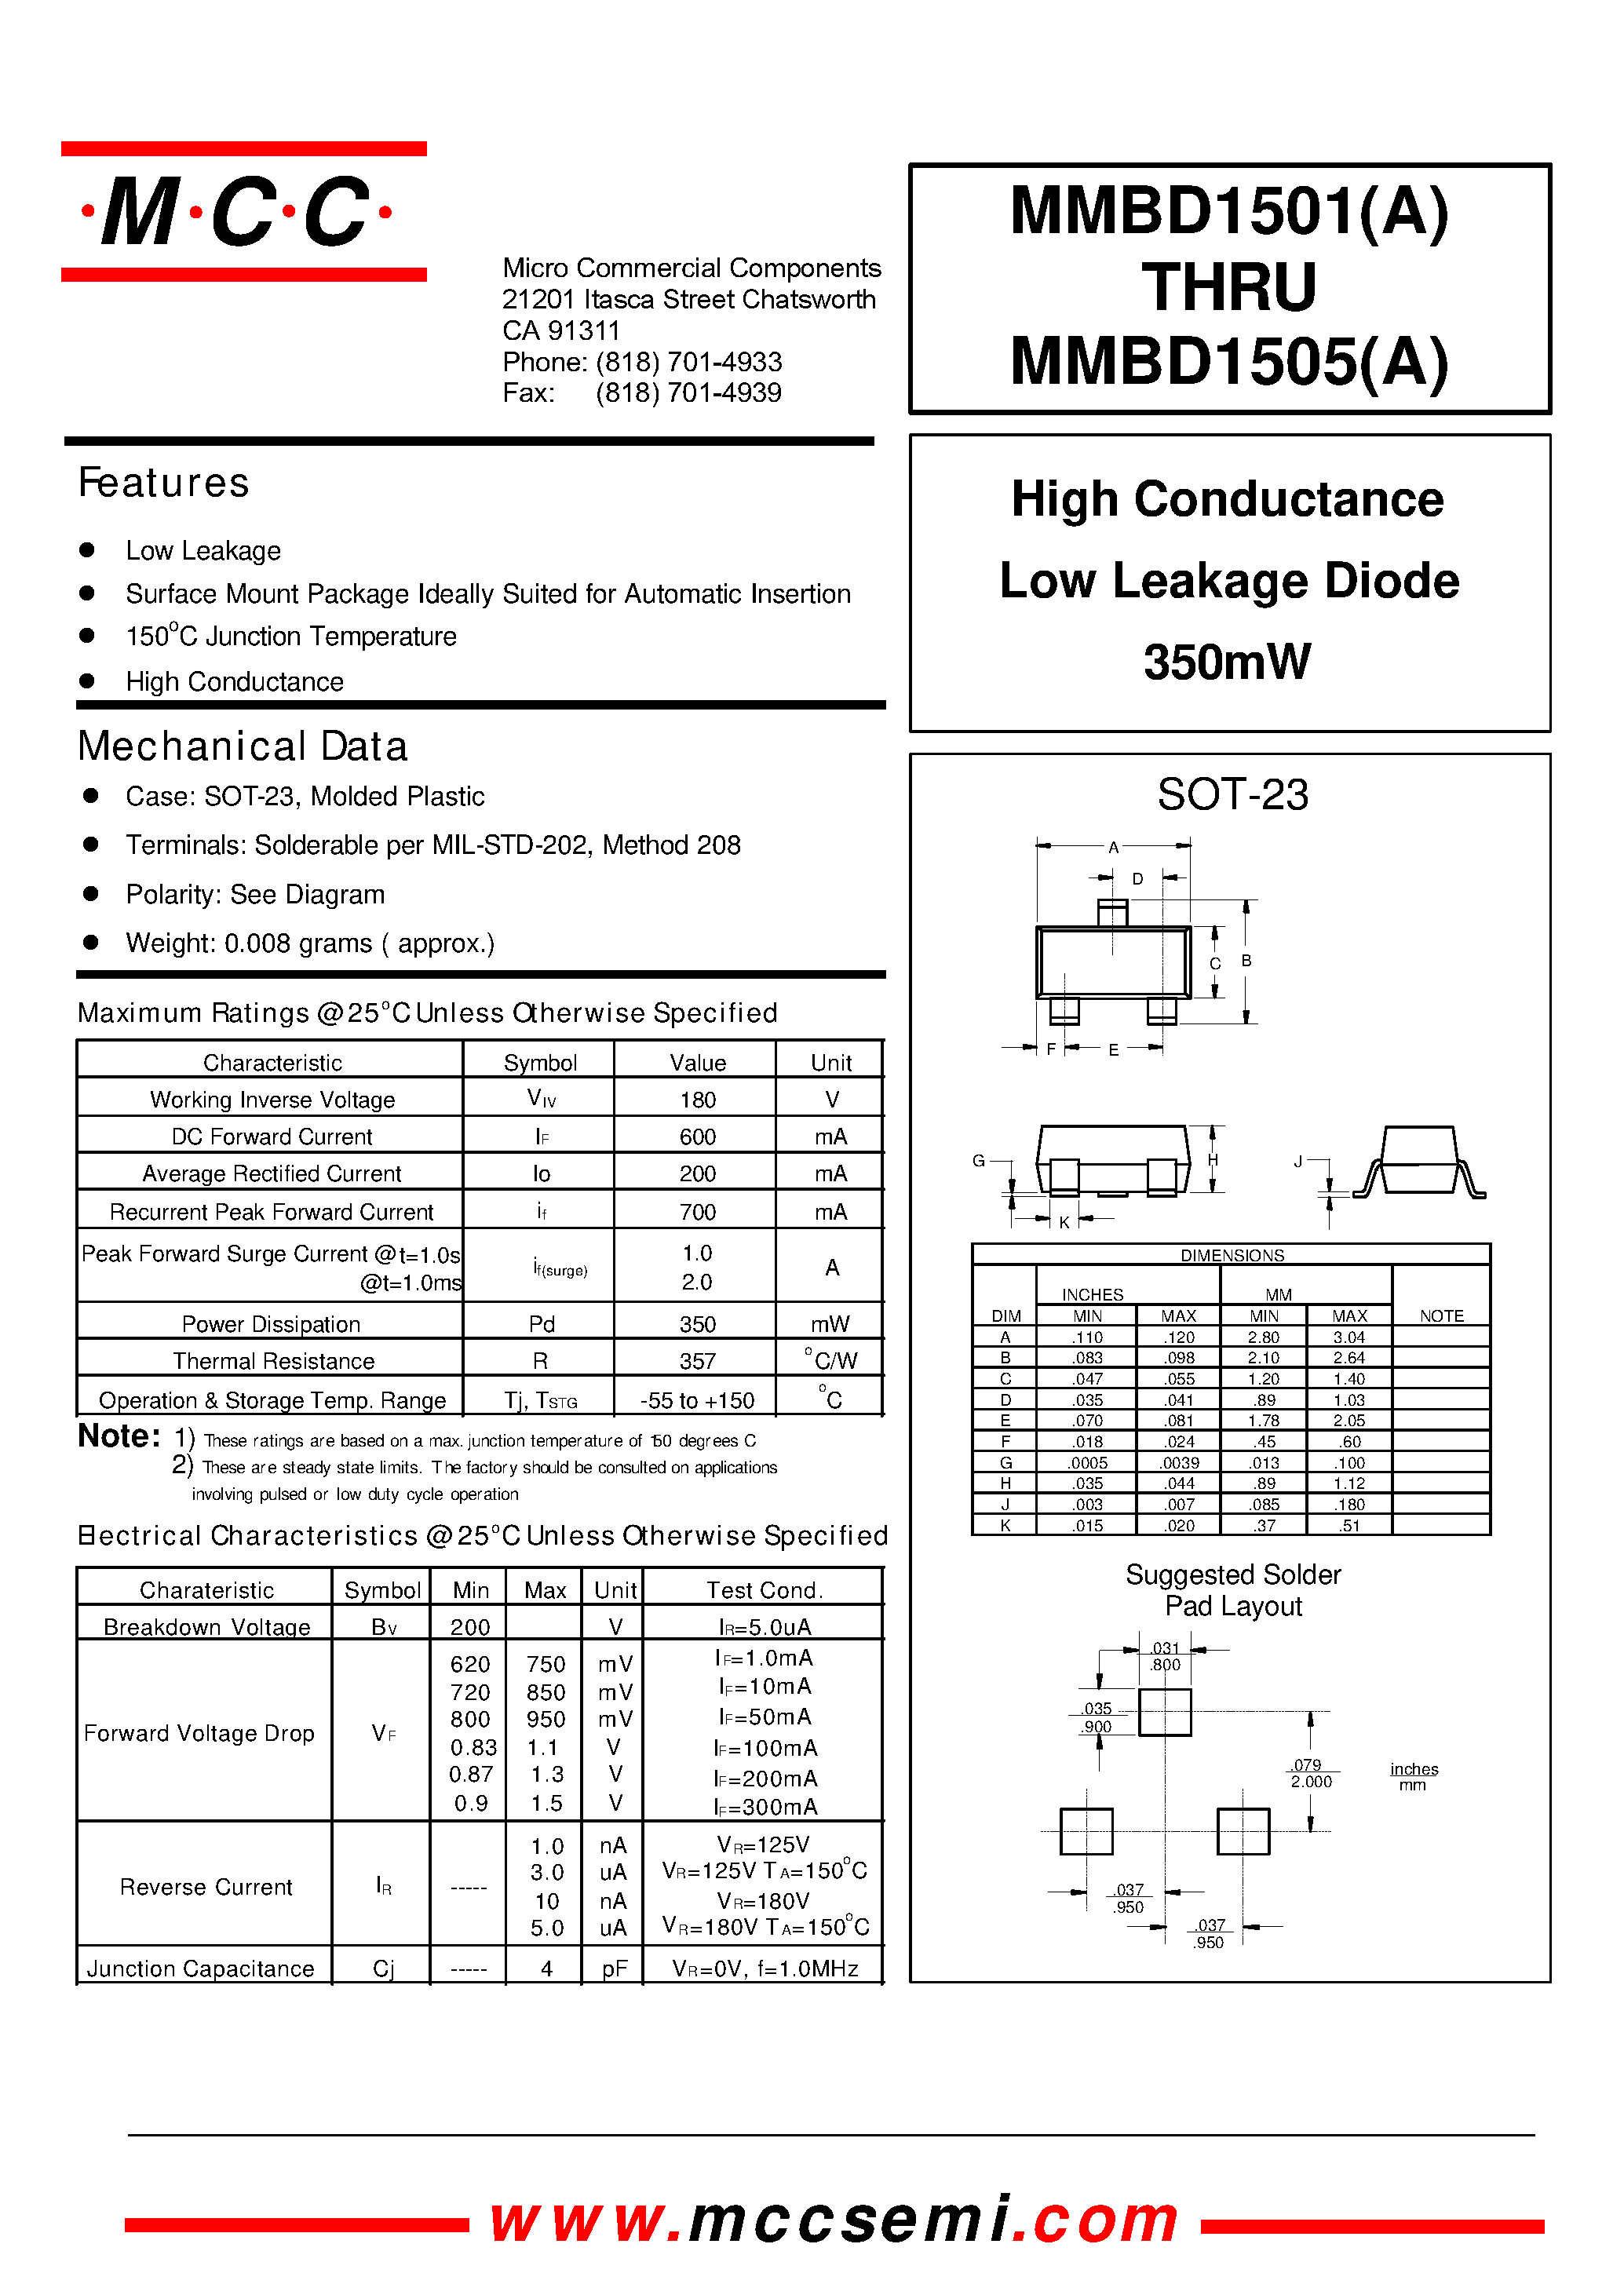 Datasheet MMBD1504A - High Conductance Low Leakage Diode 350mW page 1